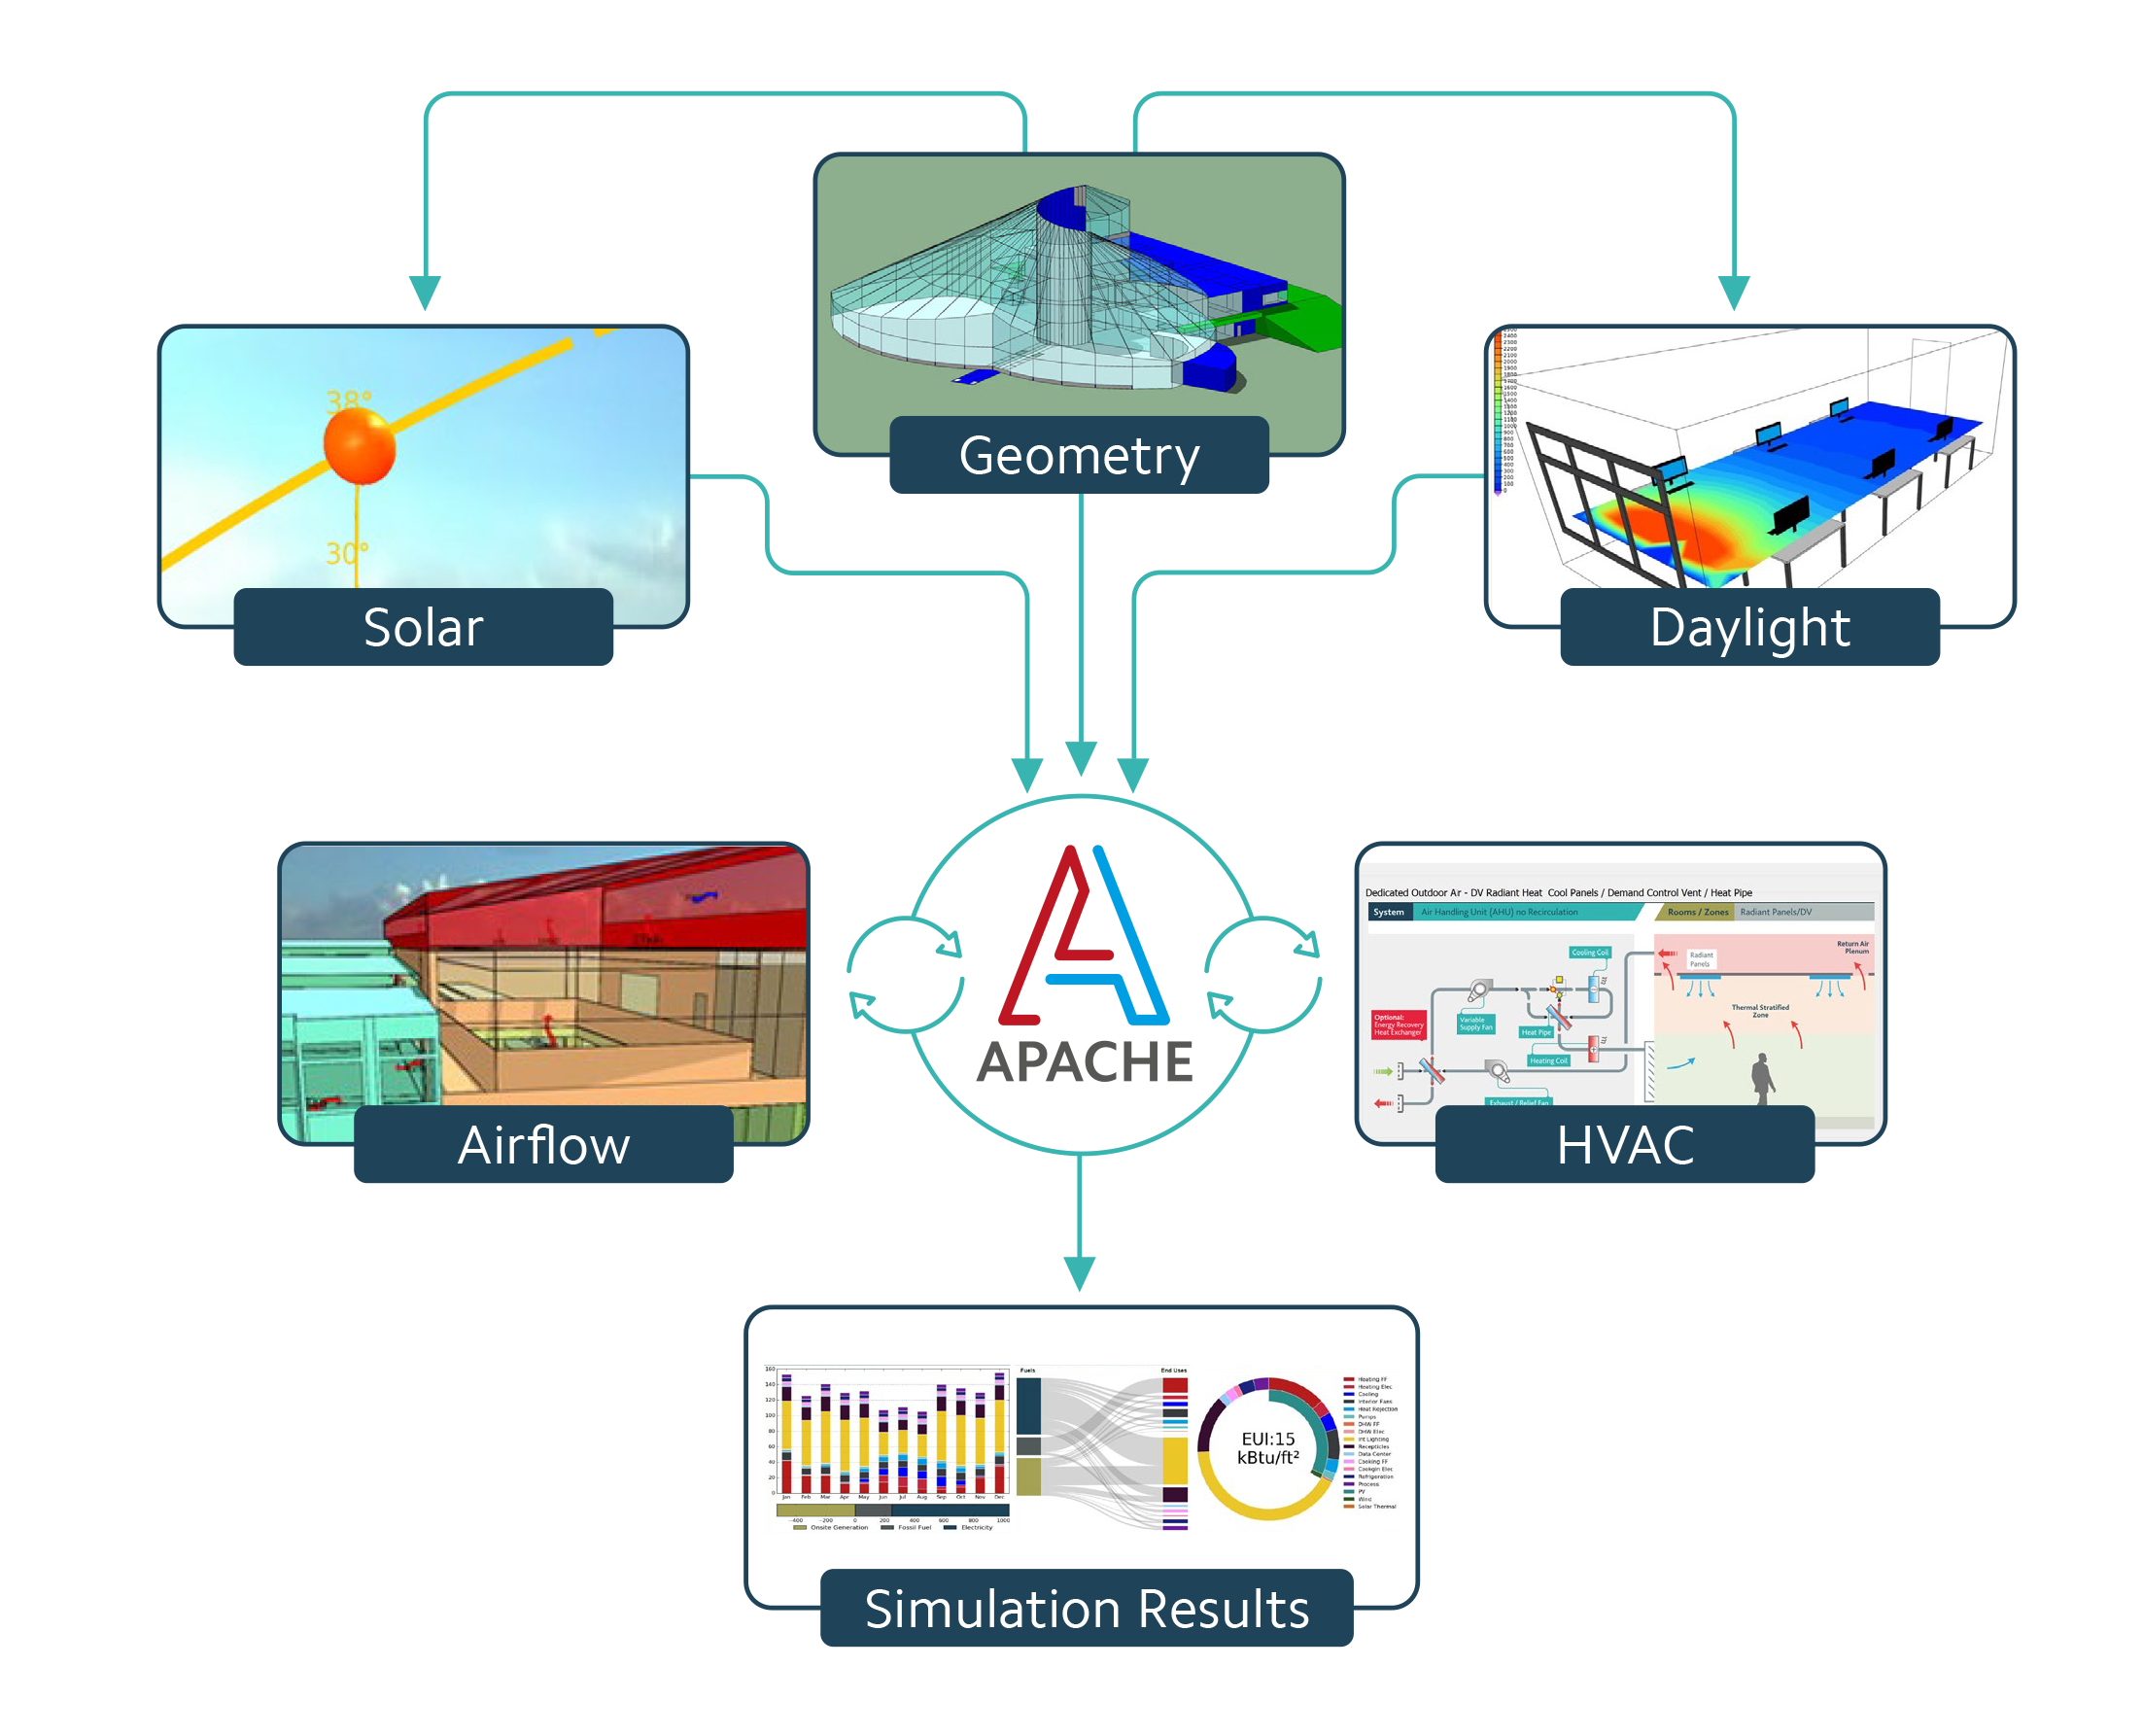 6 areas of analysis covered by Apache simulation engine of IESVE